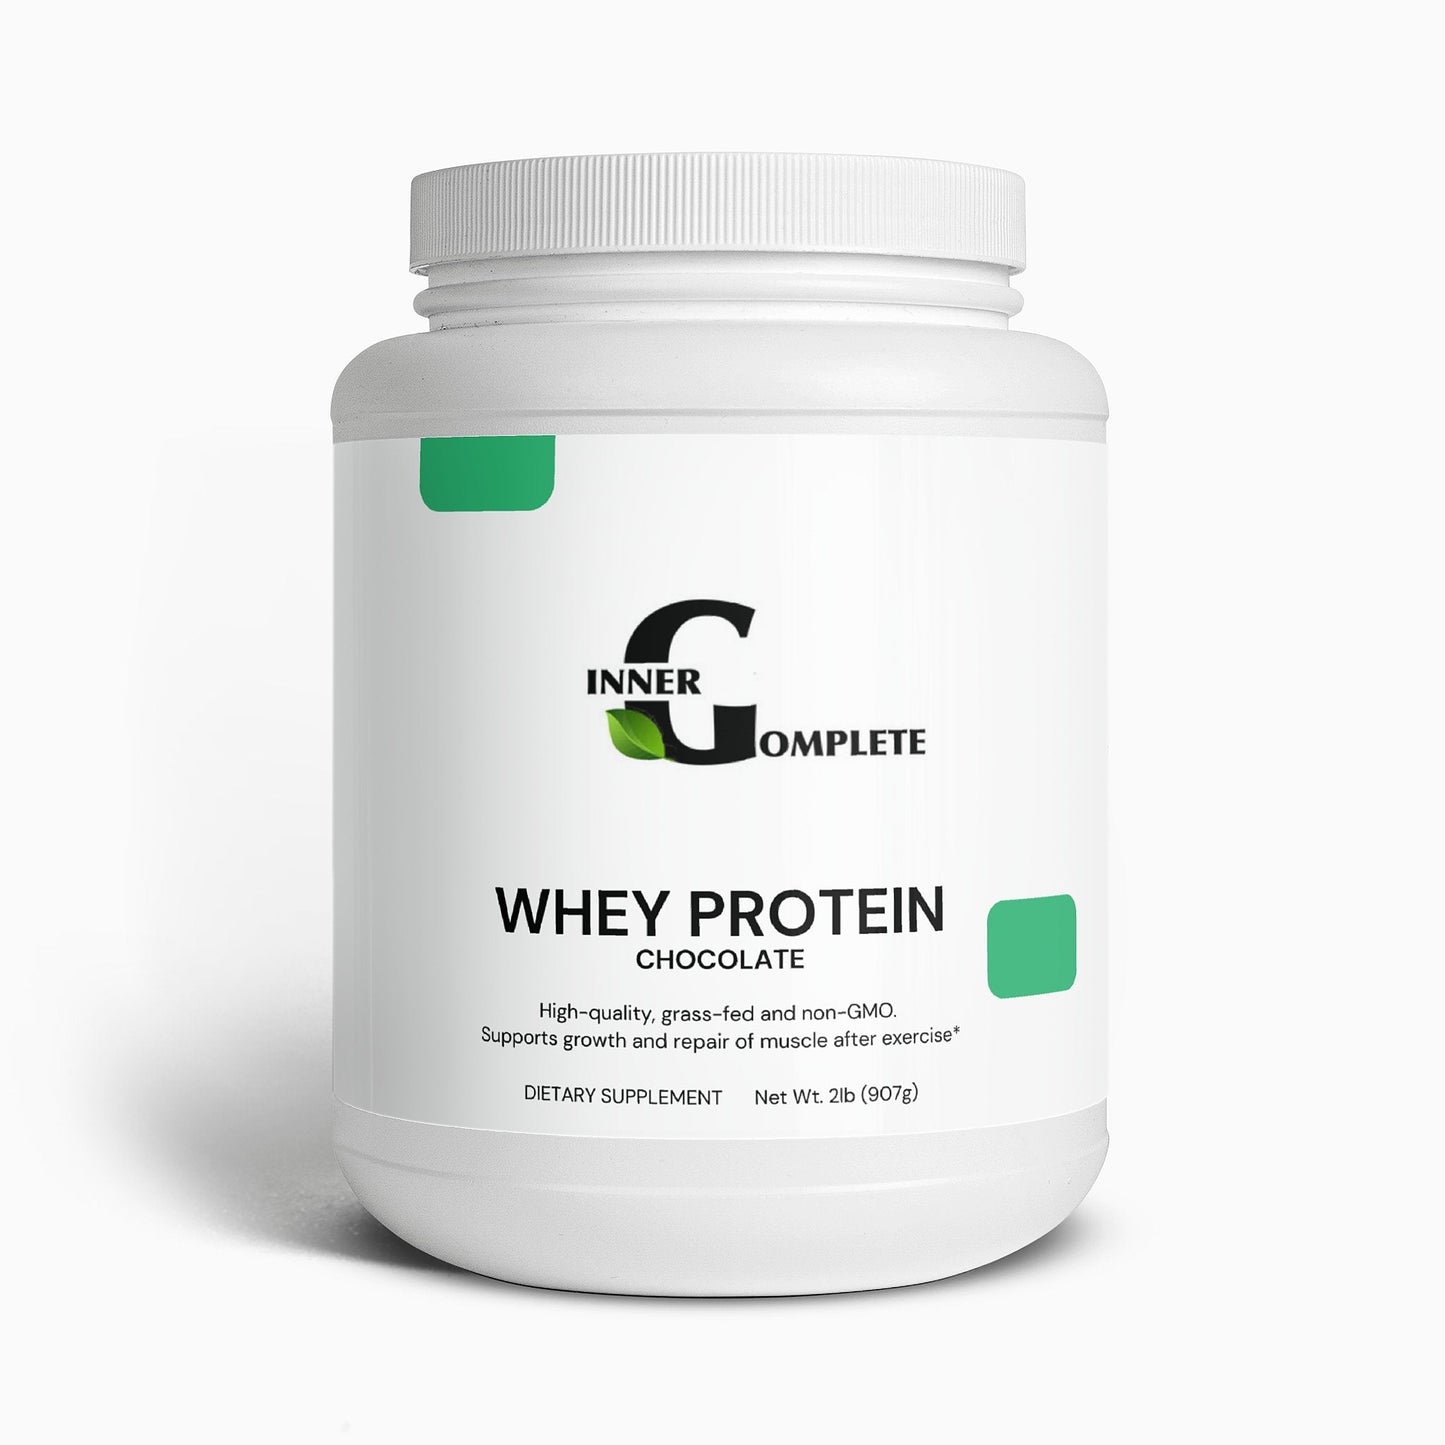 Whey Protein (Chocolate Flavour) Inner G Complete Wellness 